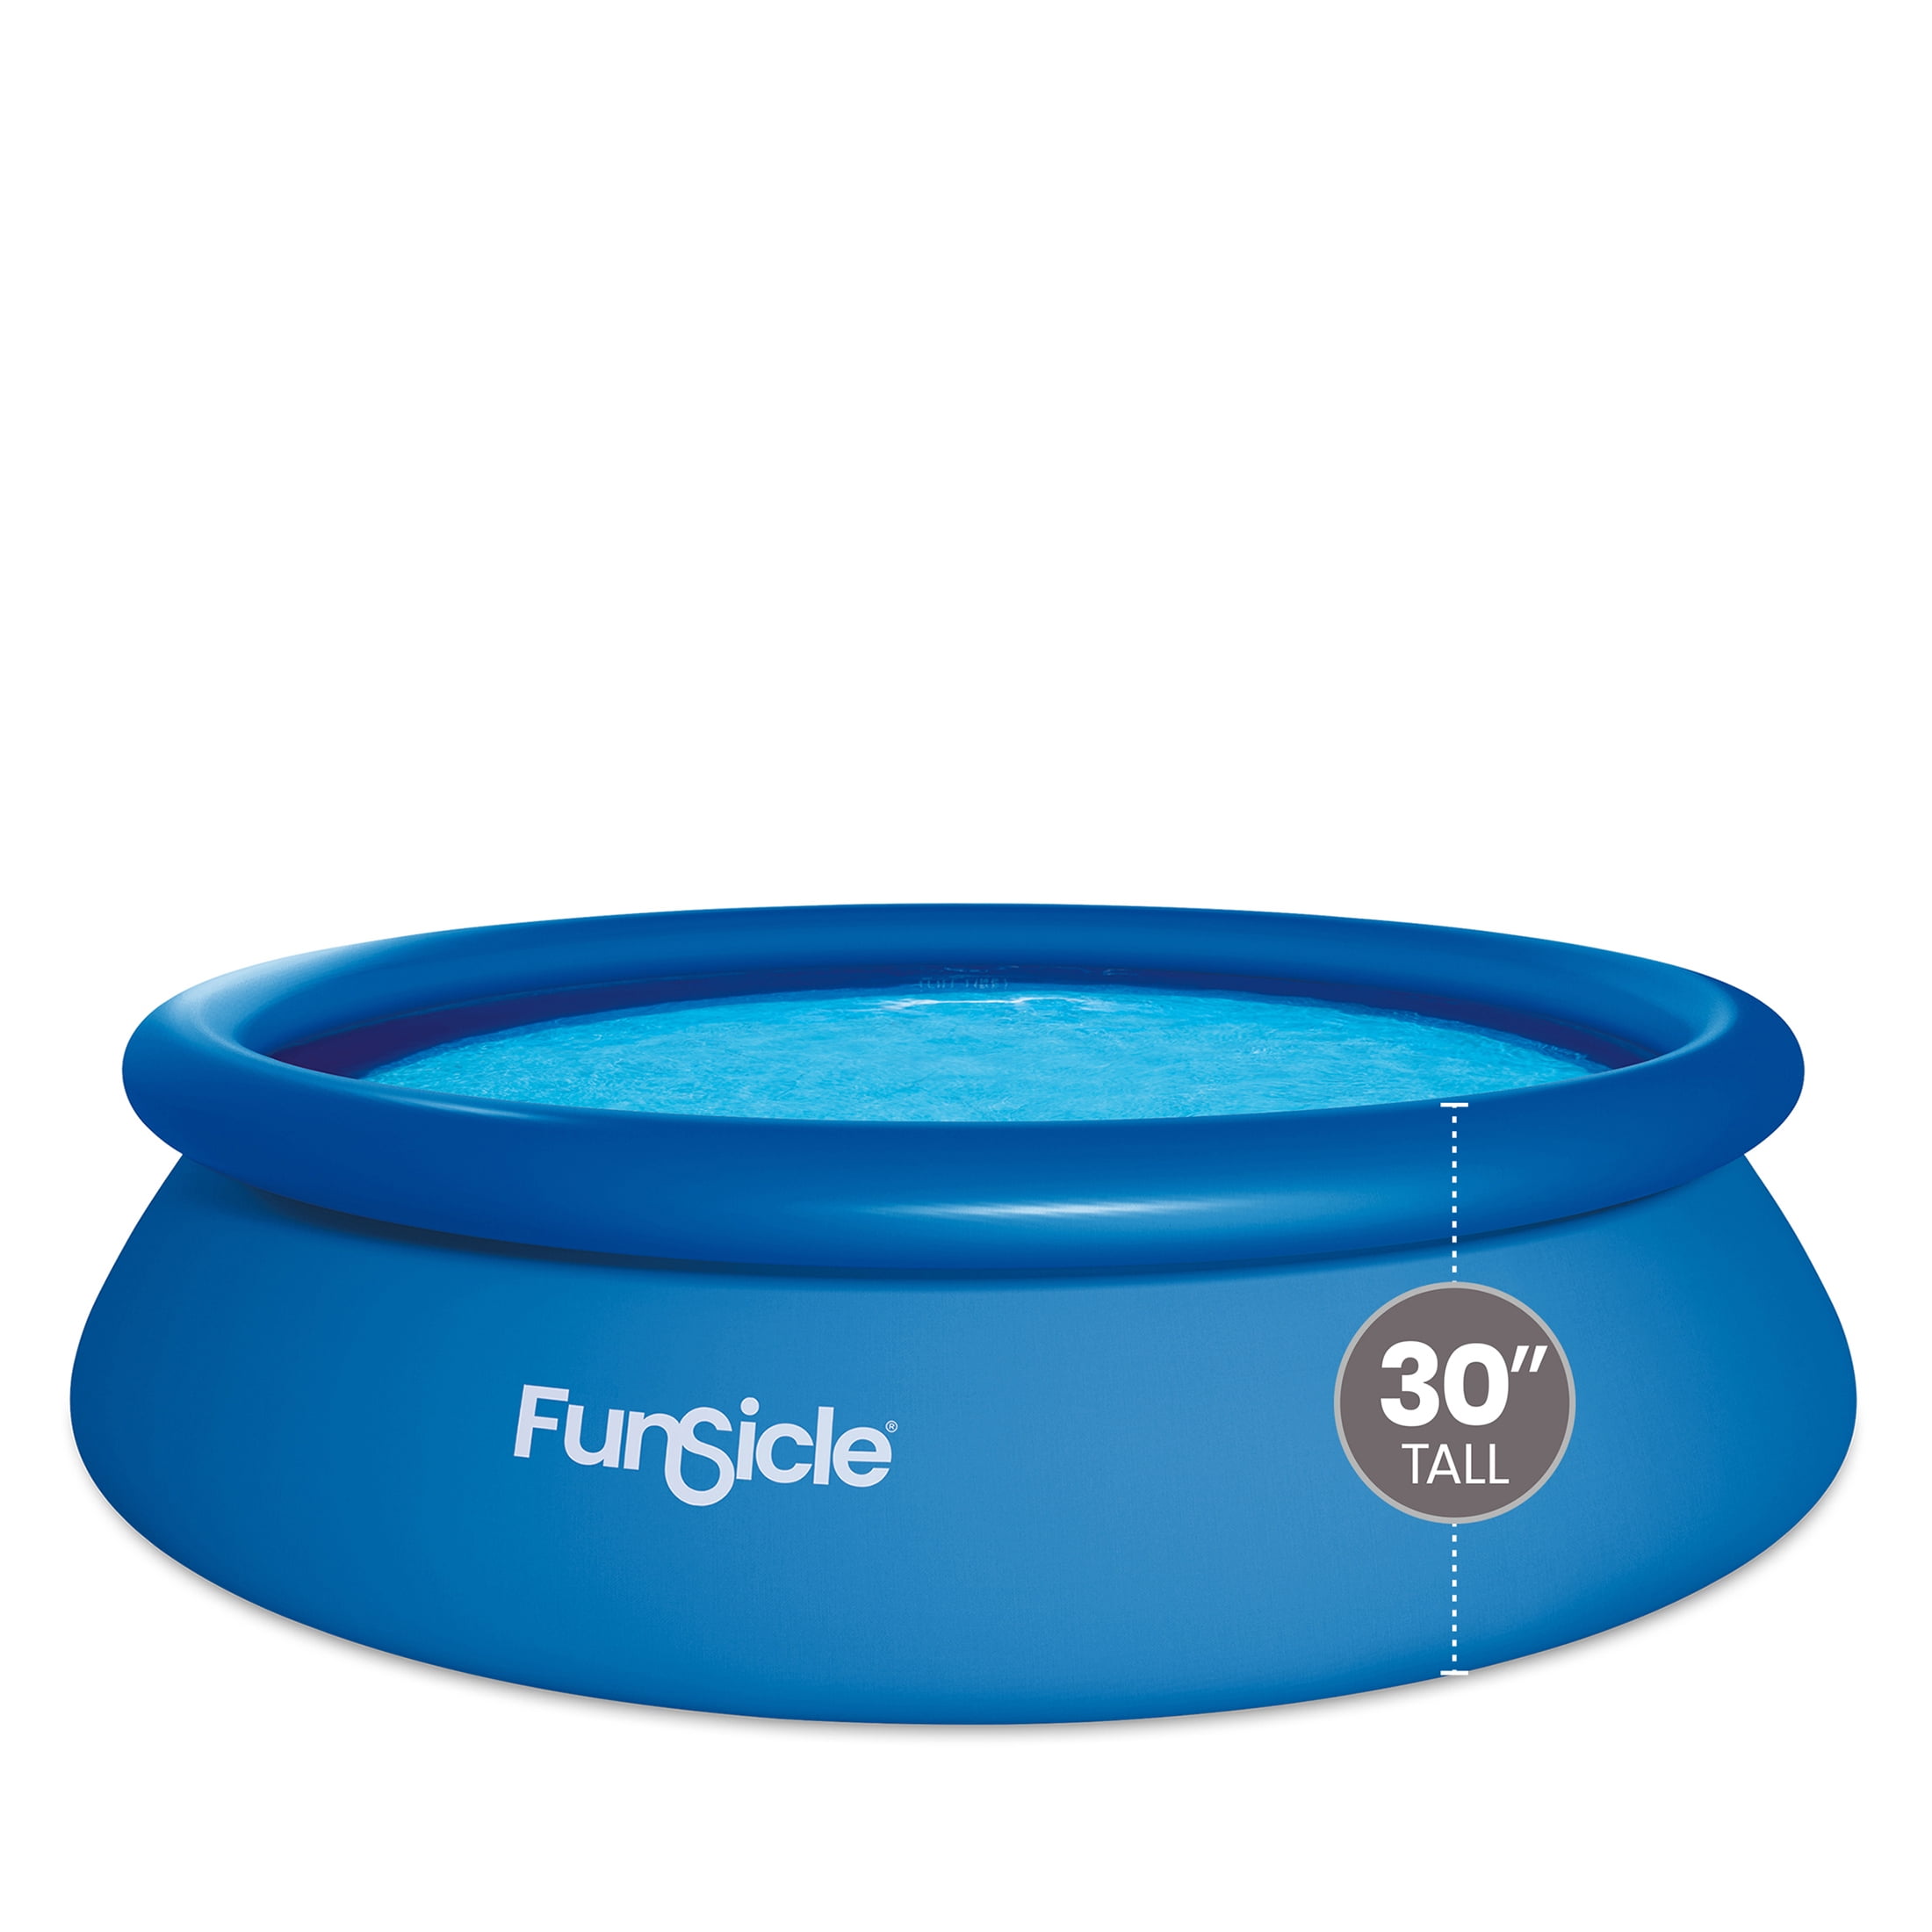 Funsicle 10 ft QuickSet Round Above Ground Pool, Includes Cartridge Filter Pump, Age 6 & Up